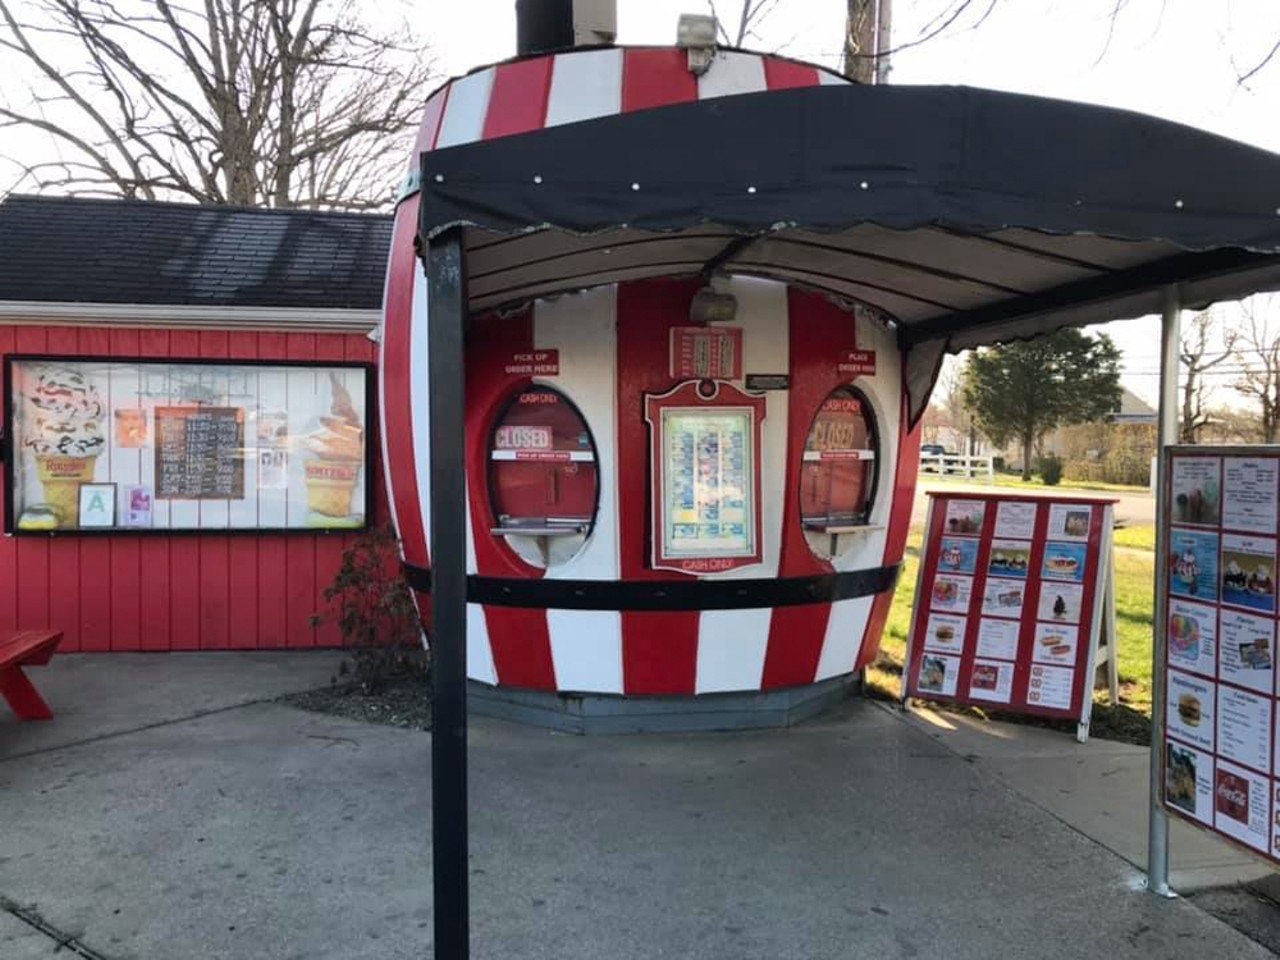 The Barrel Of Fun Ice Cream
9421 Smyrna Pkwy
You&#146;ll recognize this ice cream stand pretty quickly once you see it: it&#146;s shaped exactly like its name suggests. They serve plenty of ice cream scoops, plus sundaes, snow cones, banana splits, burgers, pretzels, and chili dogs. 
Photo via facebook.com/The-Barrel-of-Fun-Ice-Cream-115167418576447/